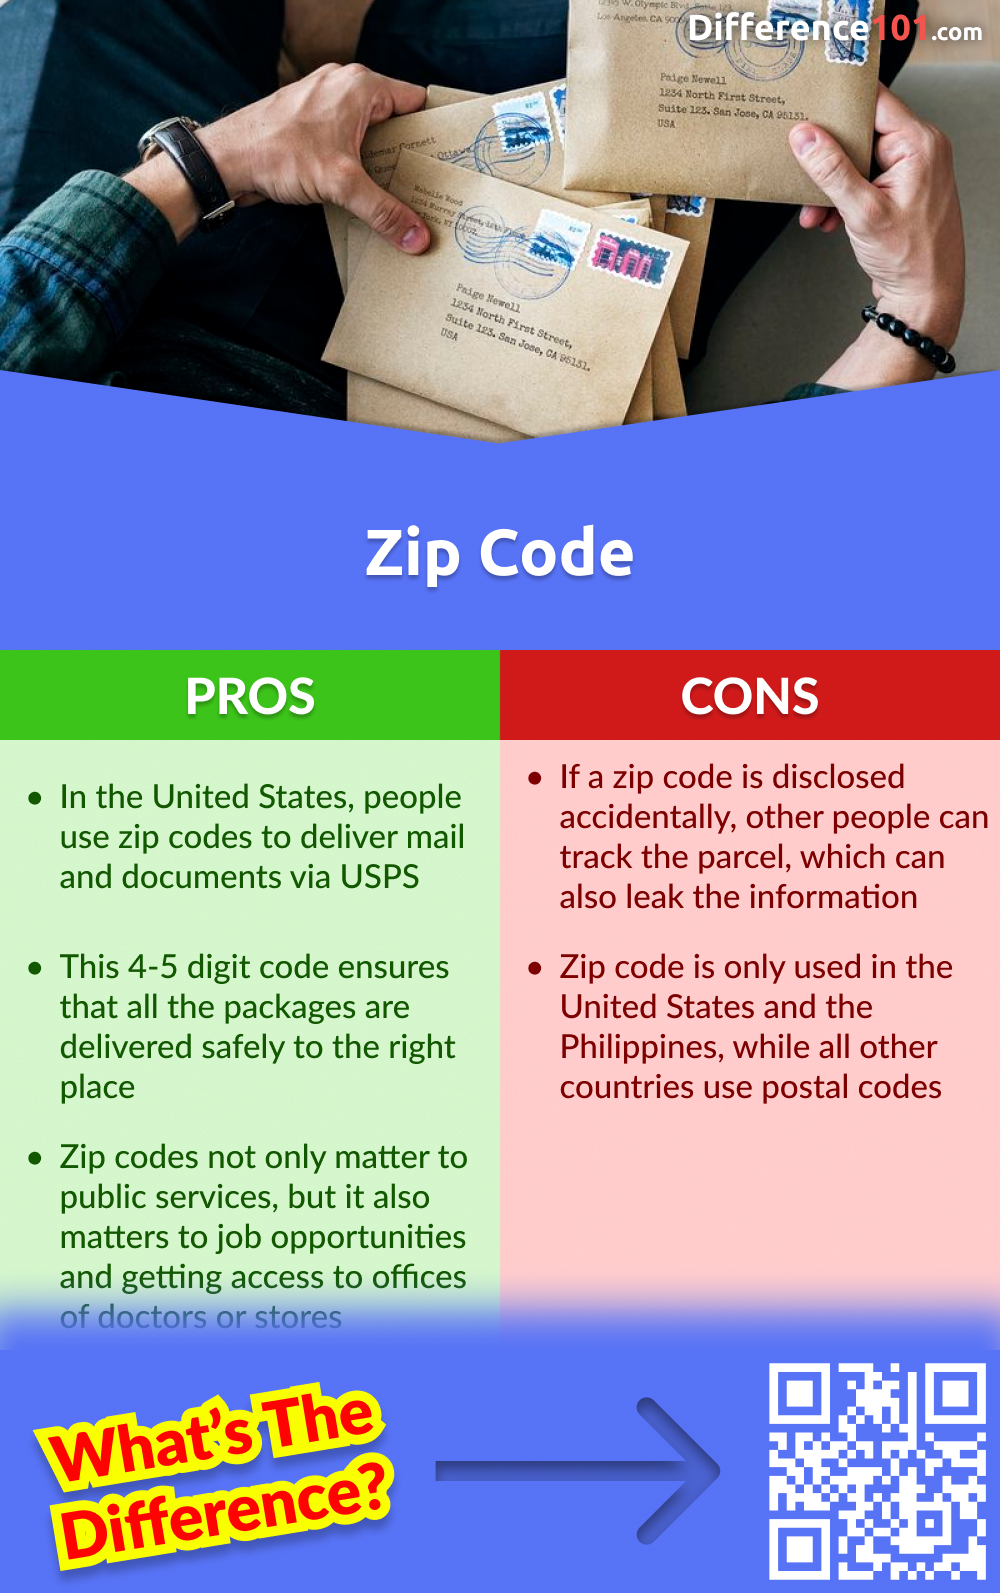 Pros and Cons of Zip Code